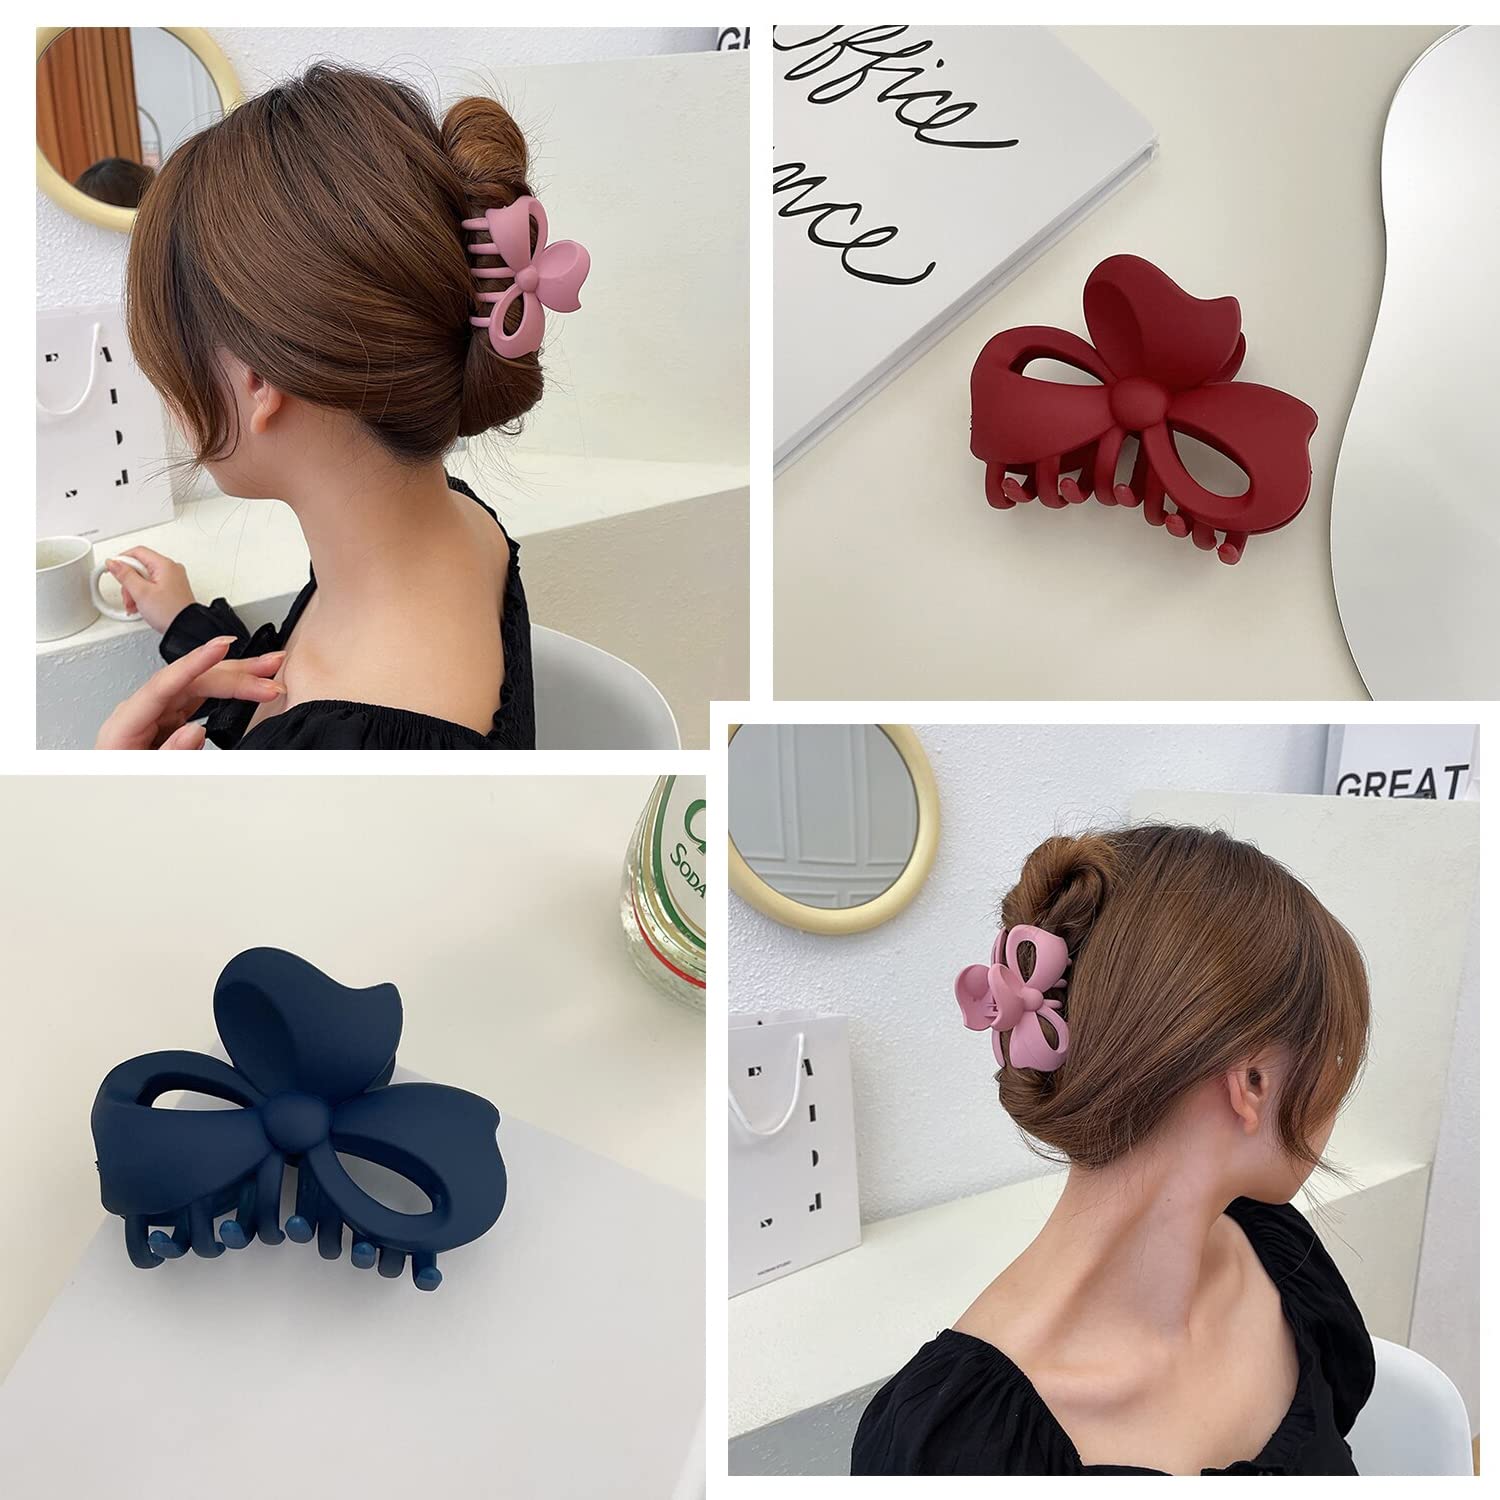 Buy SHREYA-FASHION -Butterfly Clip. Clutcher For Women Stylish for Wedding  & Parties Hair Pins for Bridal Brooch - Hairstyle Decoration (Style-4)  Online at Low Prices in India - Amazon.in